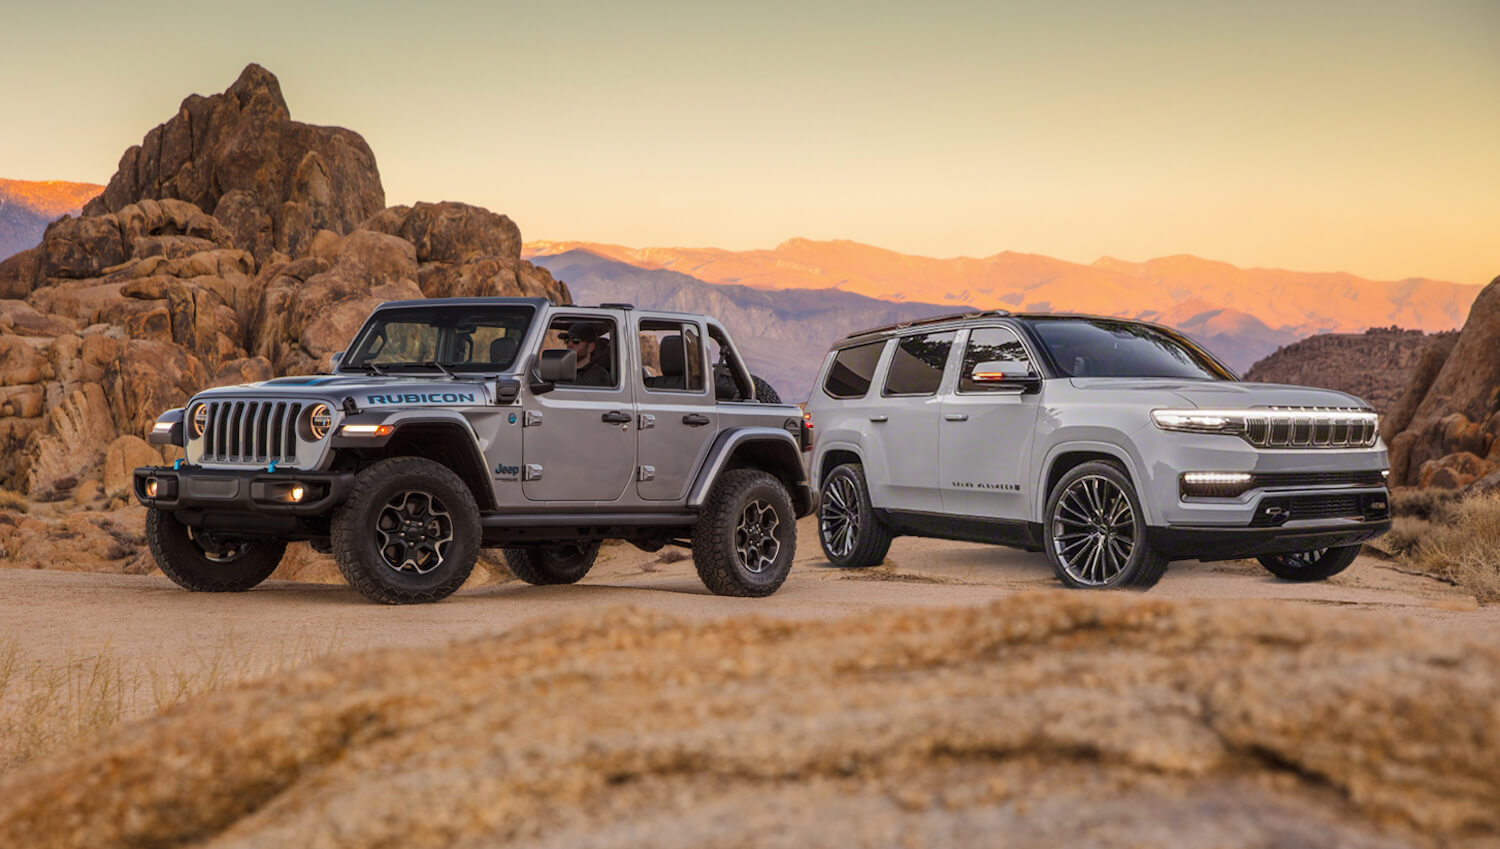 2021 Jeep Grand Wagoneer and Wrangler 4xe - The Dirt by 4WP